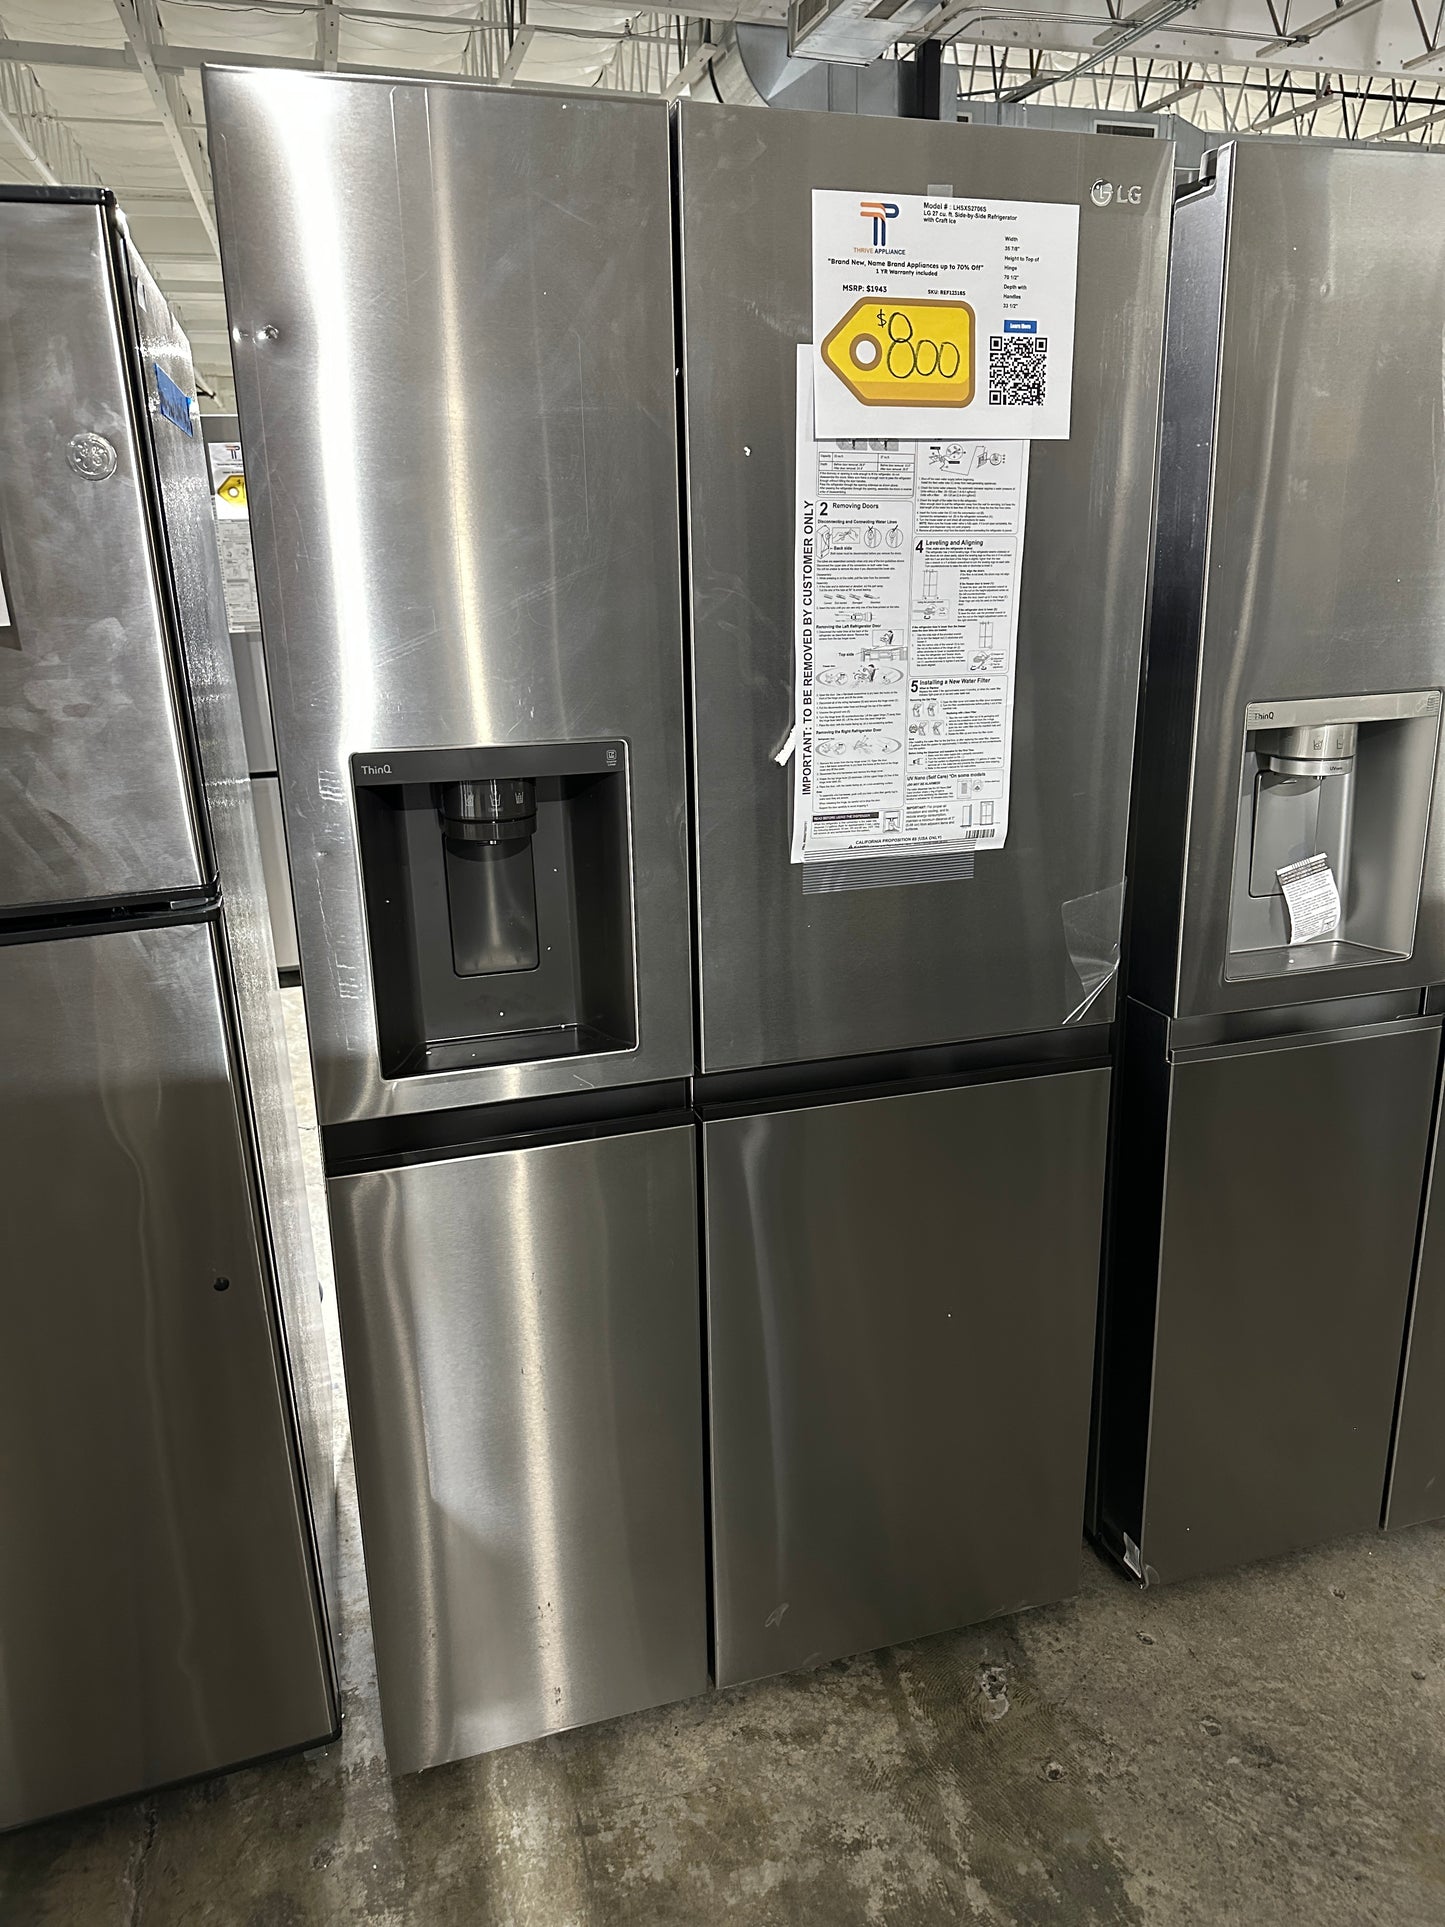 27.2 Cu. Ft. Side-by-Side Refrigerator with SpacePlus Ice - MODEL: LHSXS2706S  REF12318S